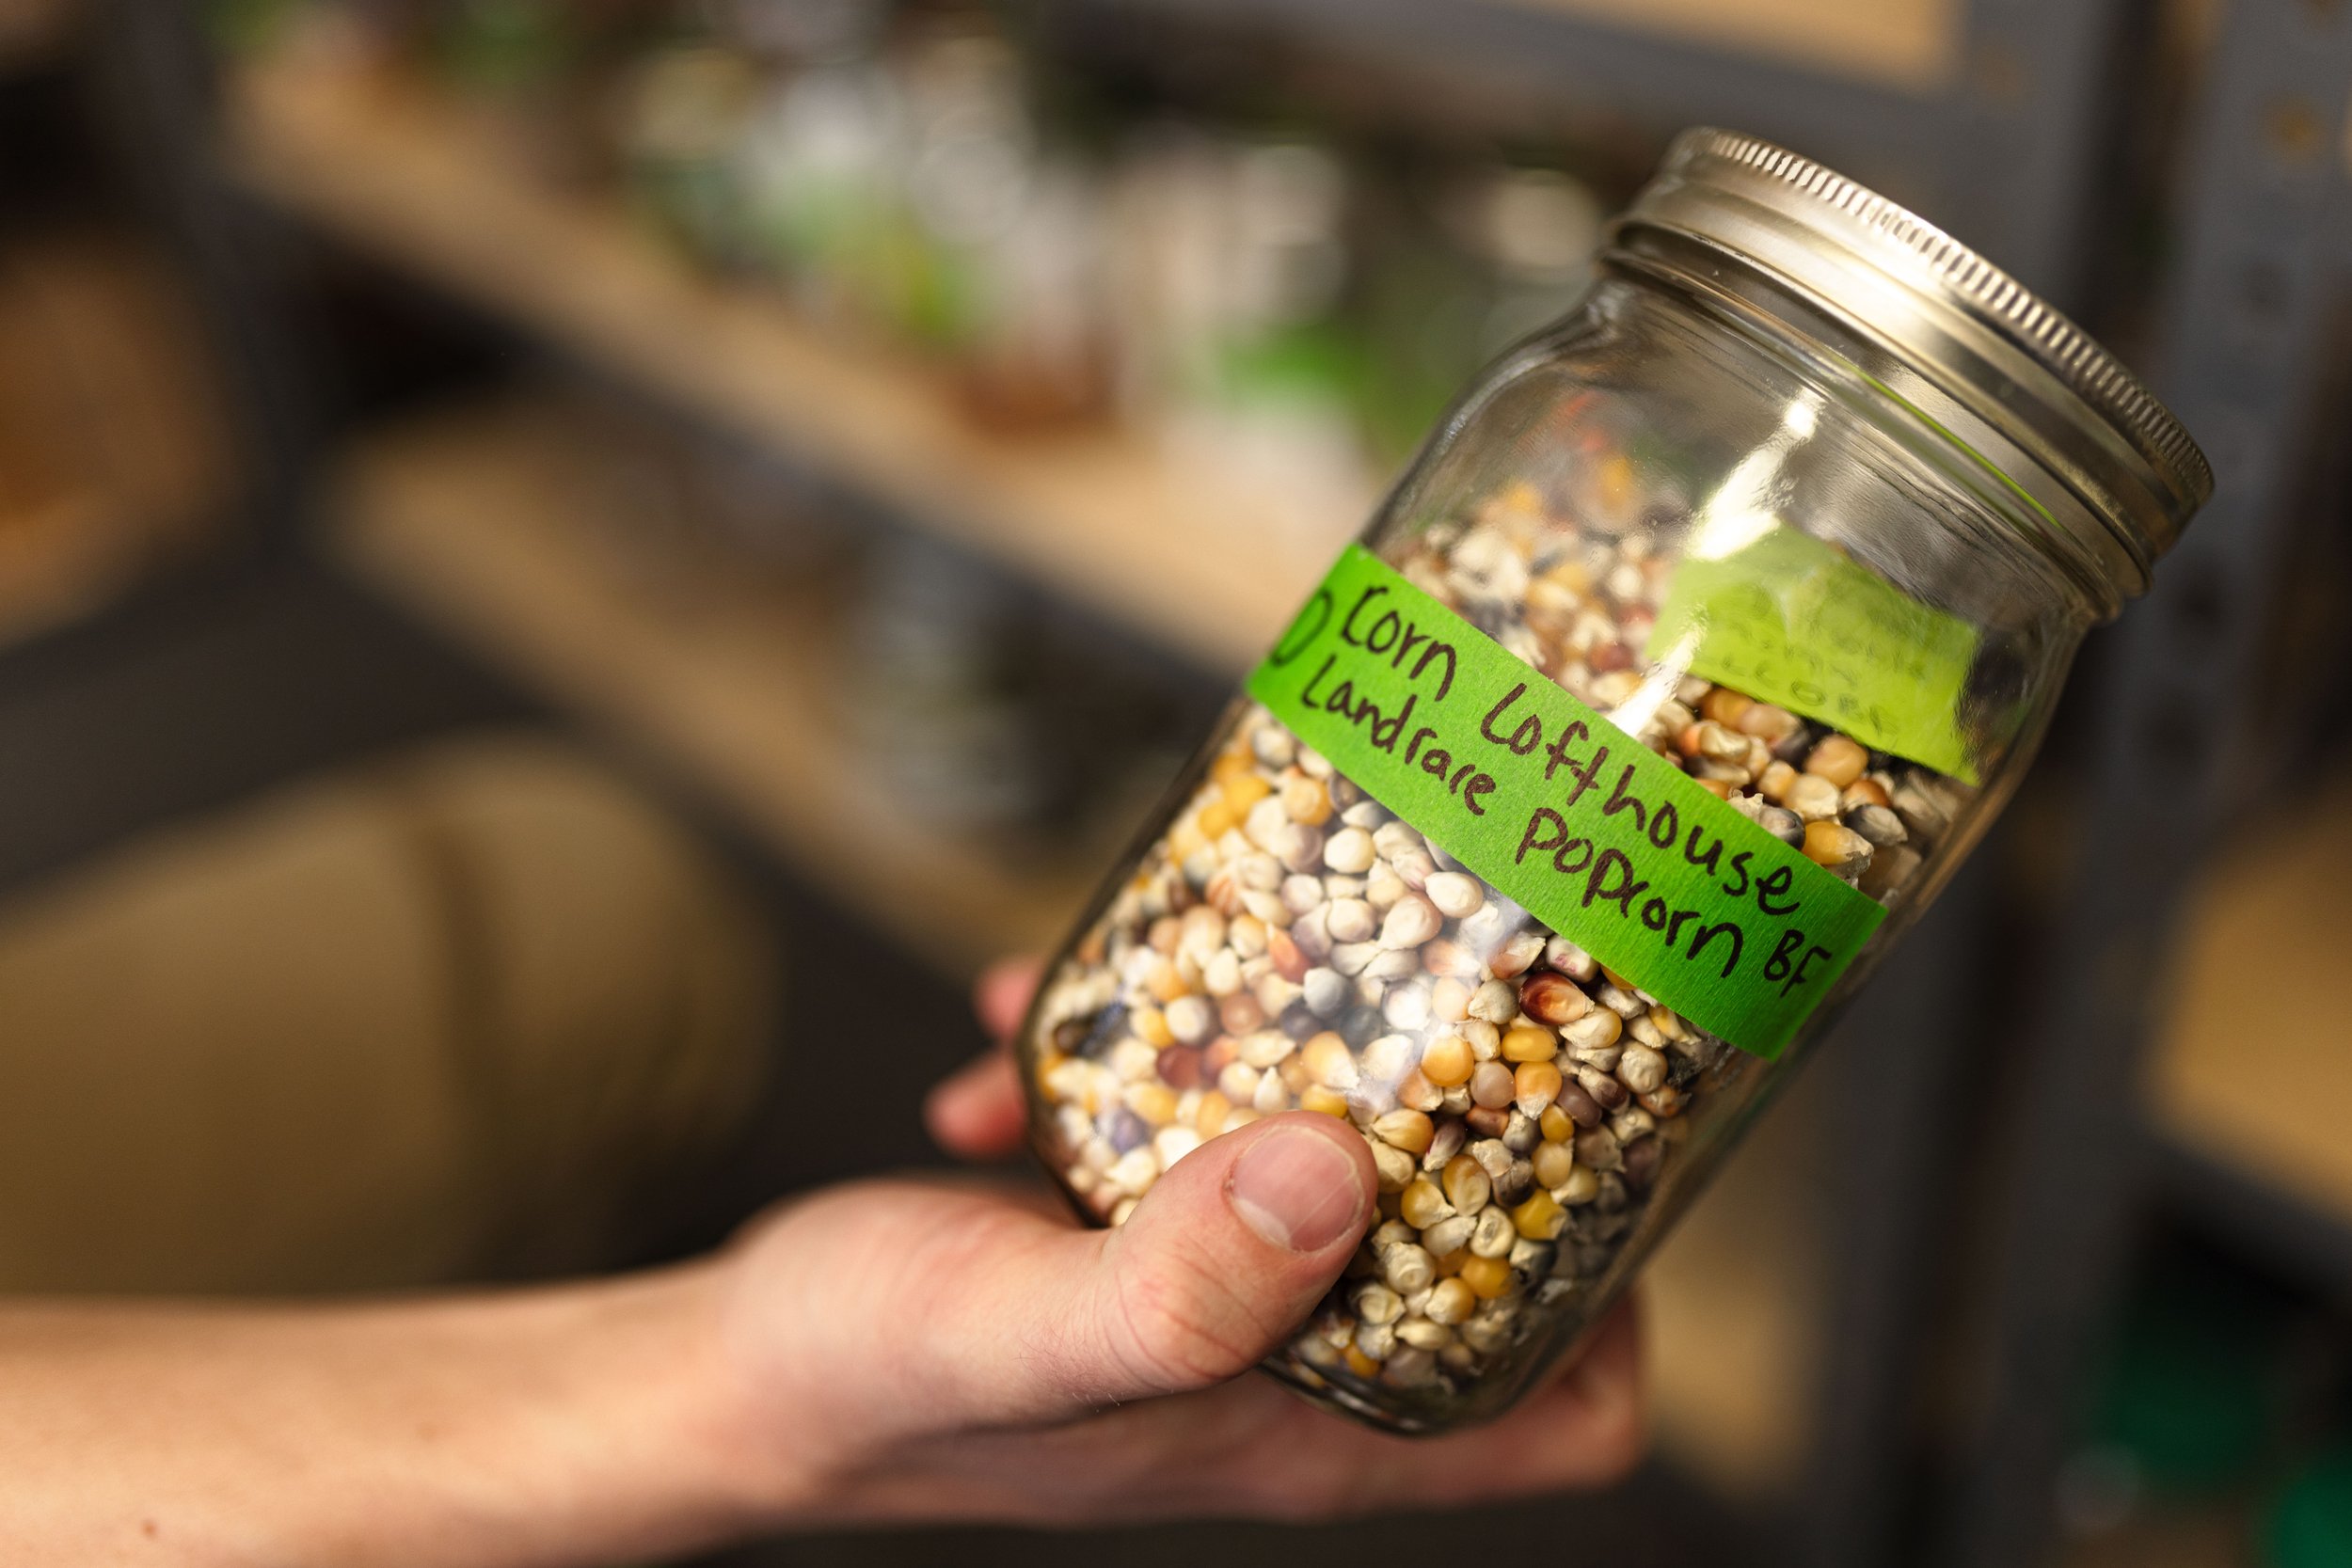  The co-op specializes in regionally adapted seeds in interesting varieties, such as this Lotfhouse Landrace Popcorn 